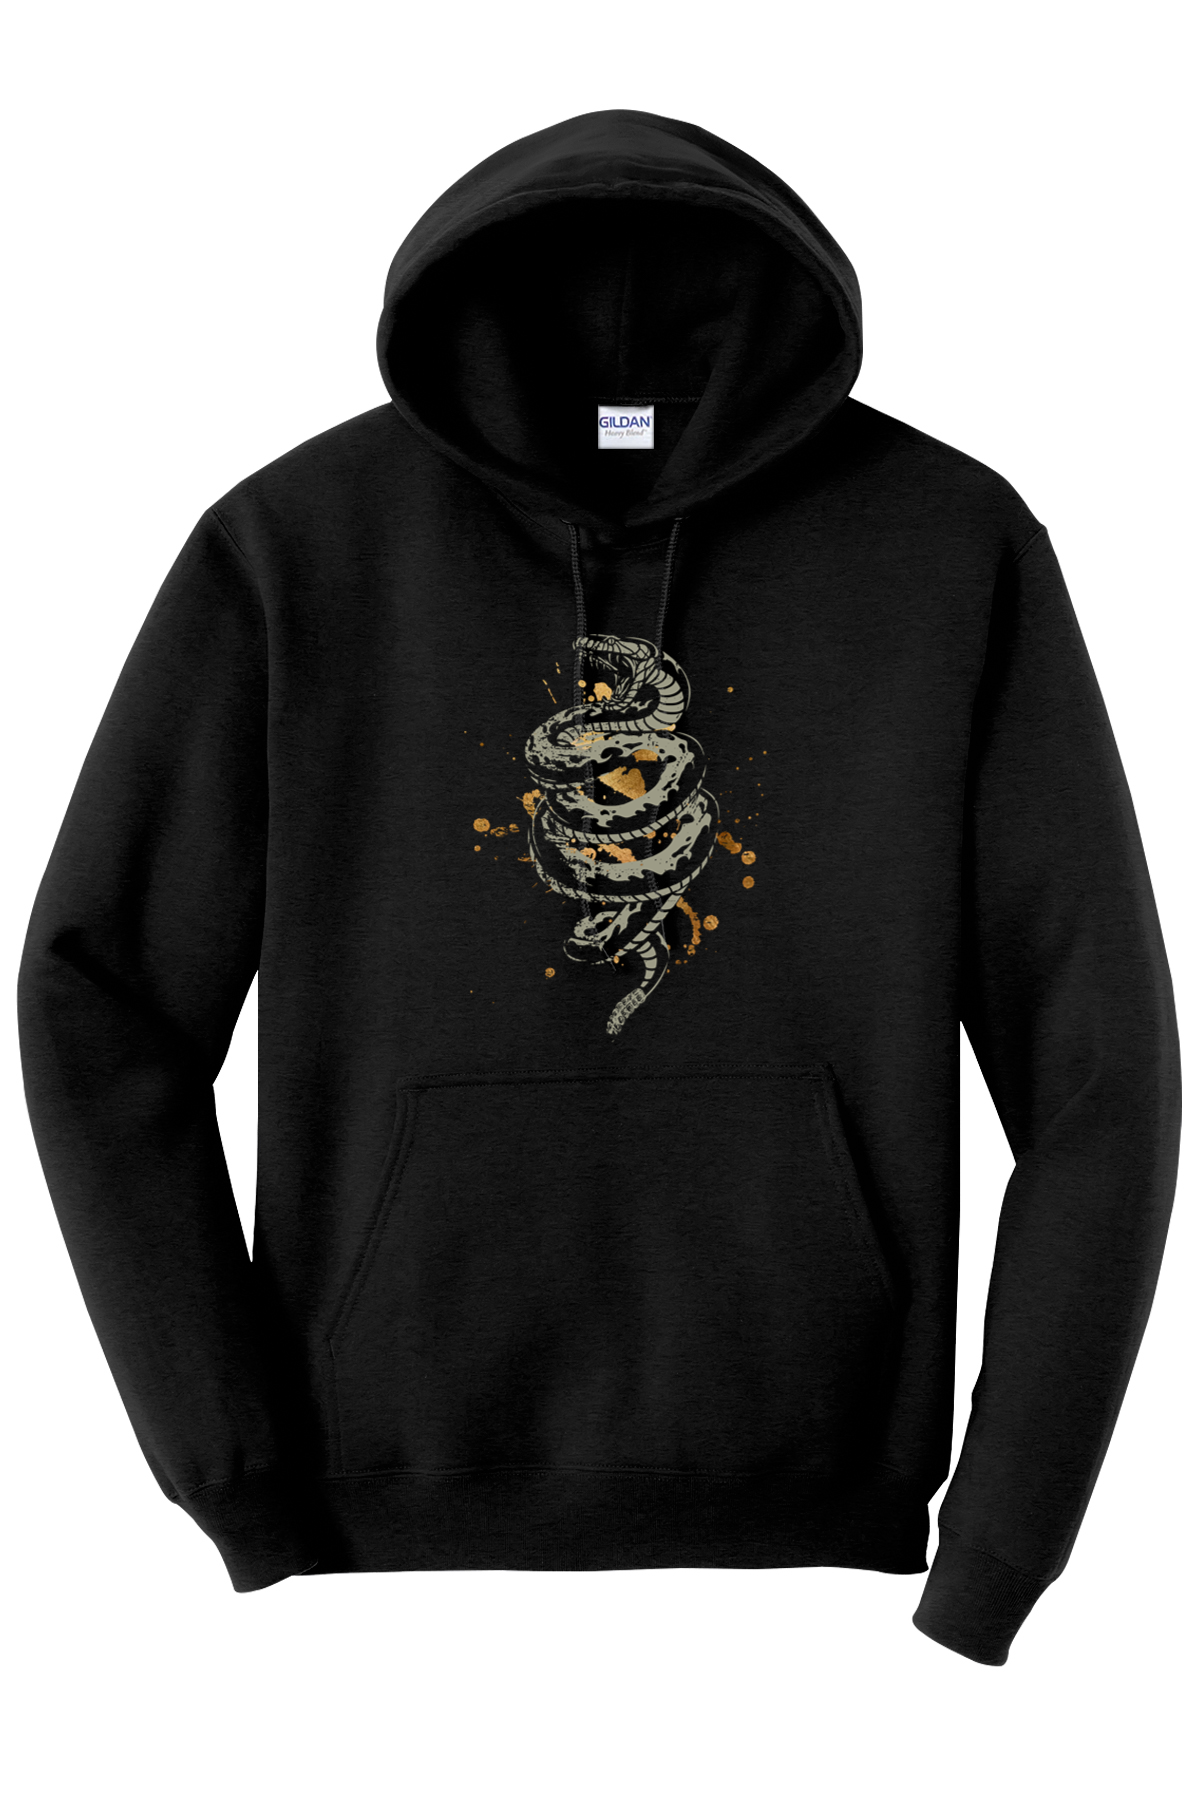 Don't Tread On Me - Raging Snake Gold Hoodie